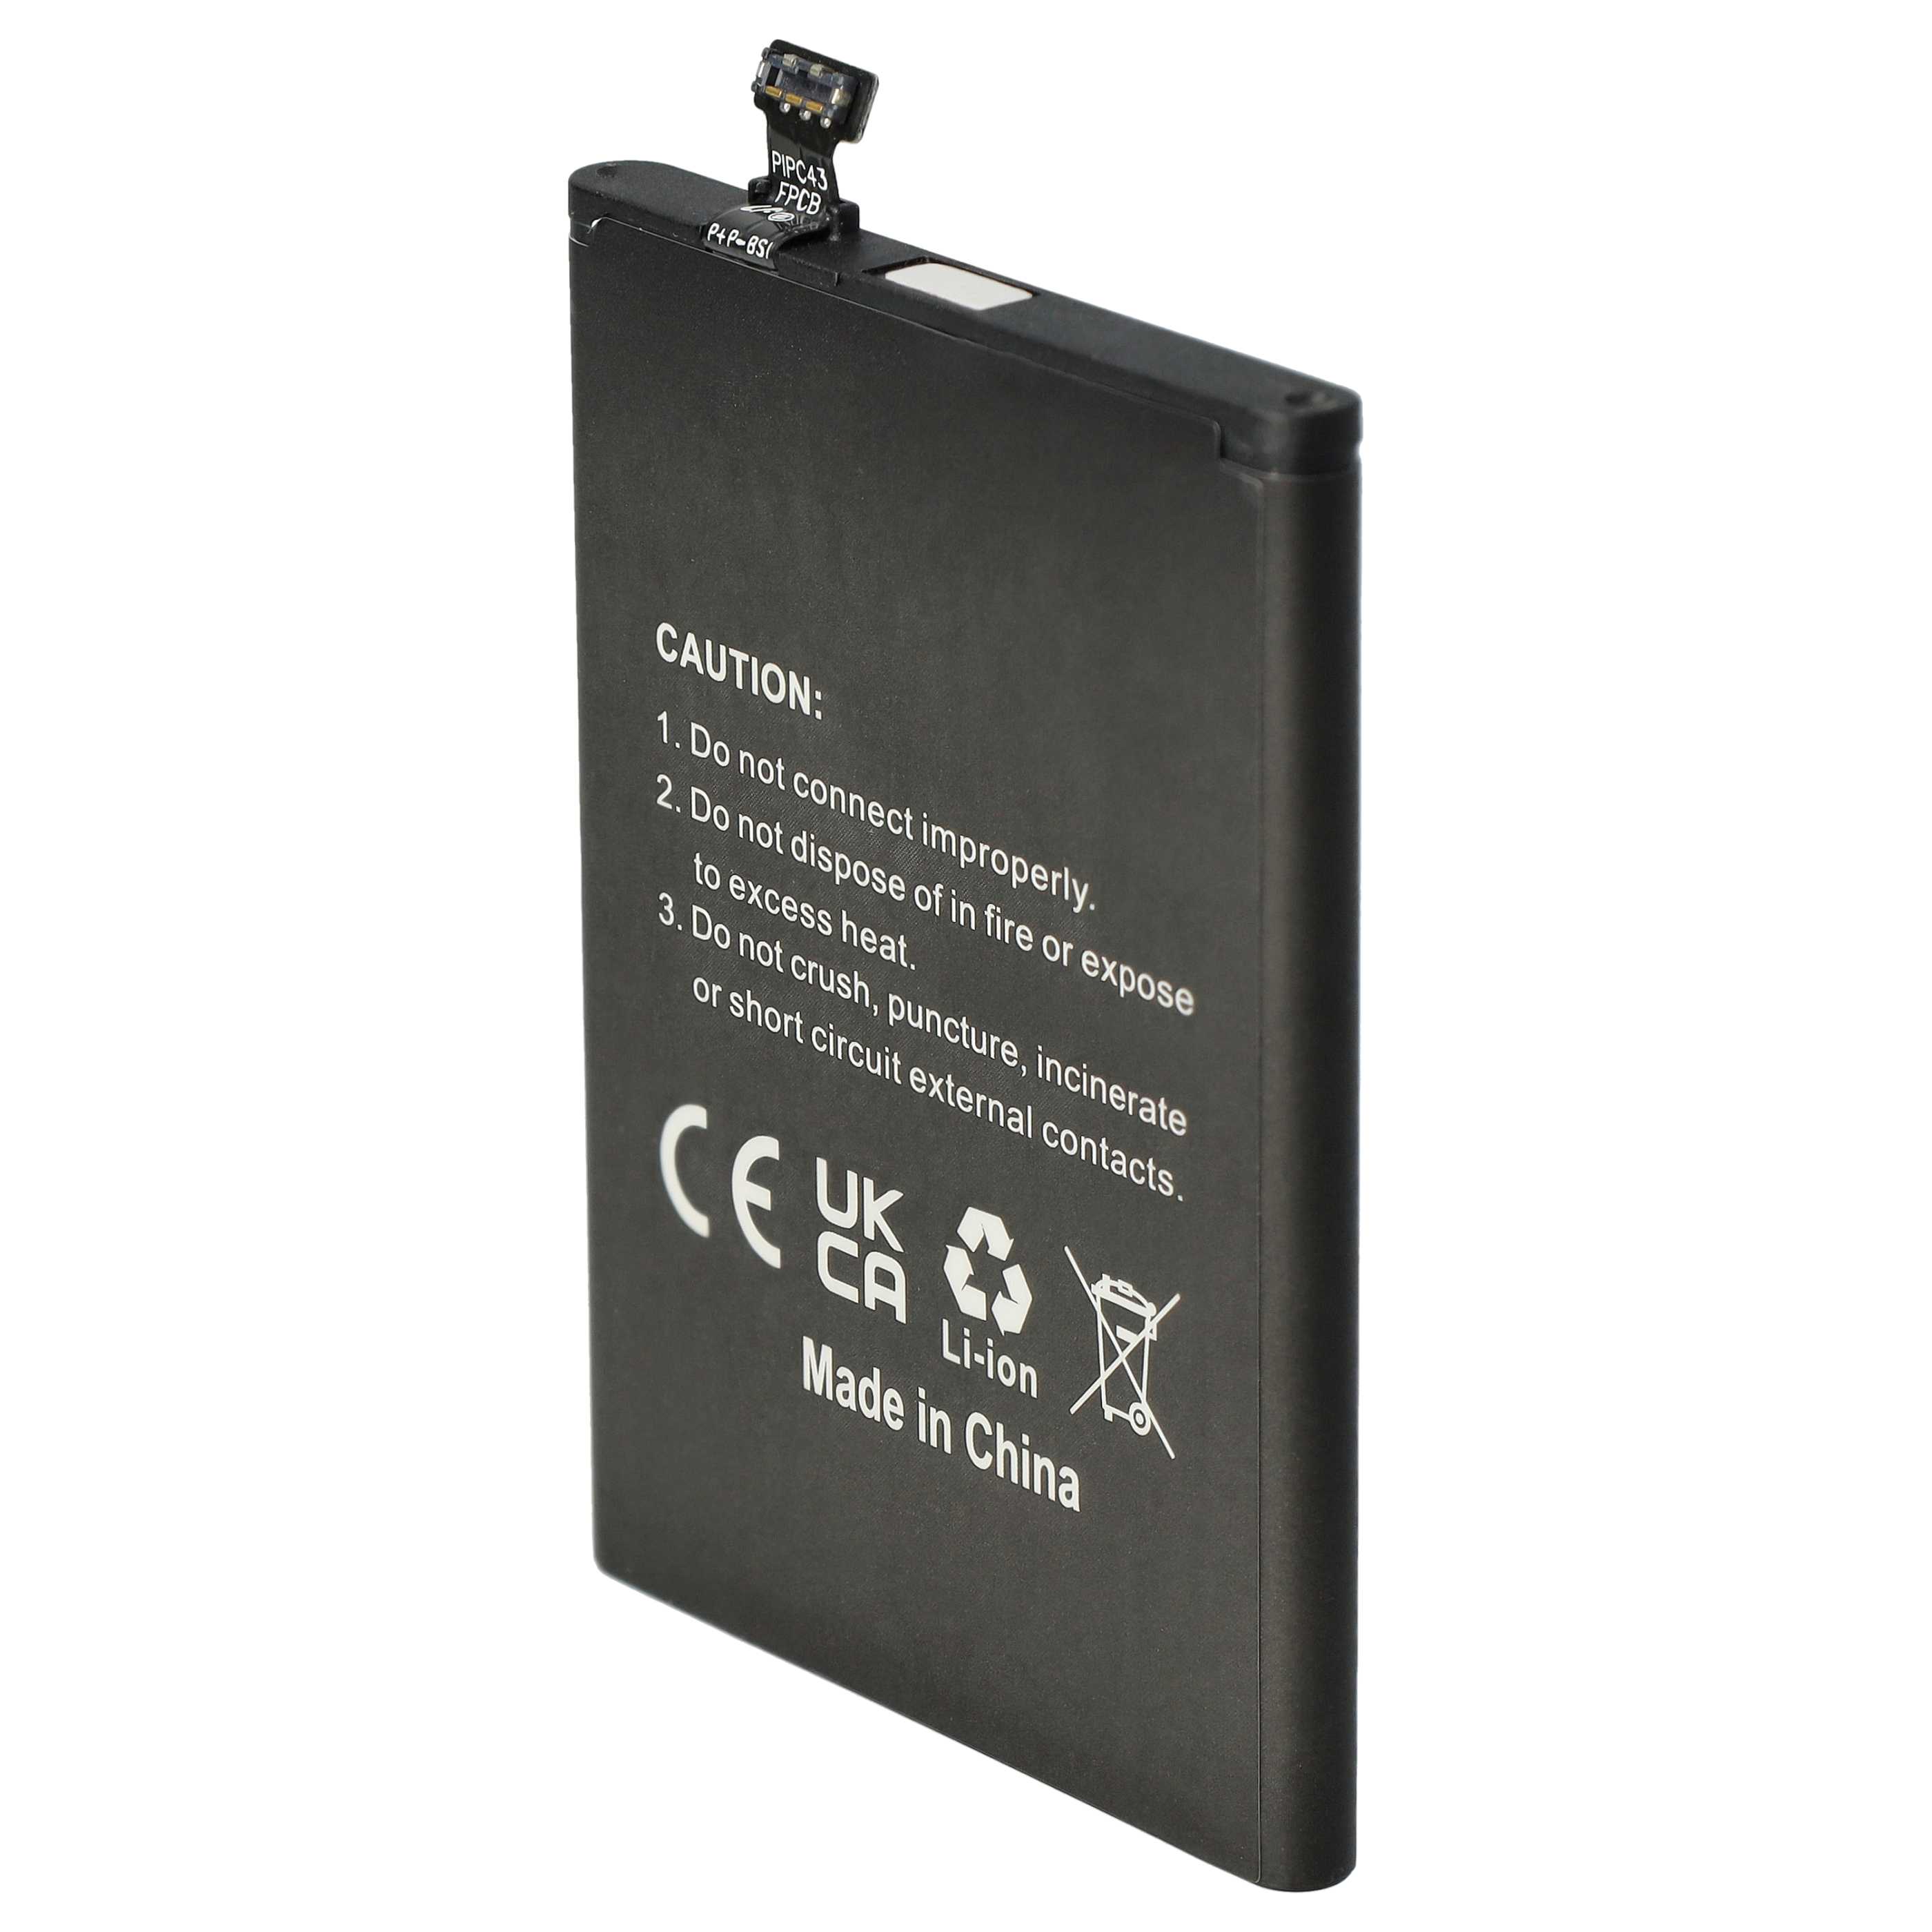 Mobile Phone Battery Replacement for Microsoft / Nokia BV-5QW - 2510mAh 3.8V Li-Ion